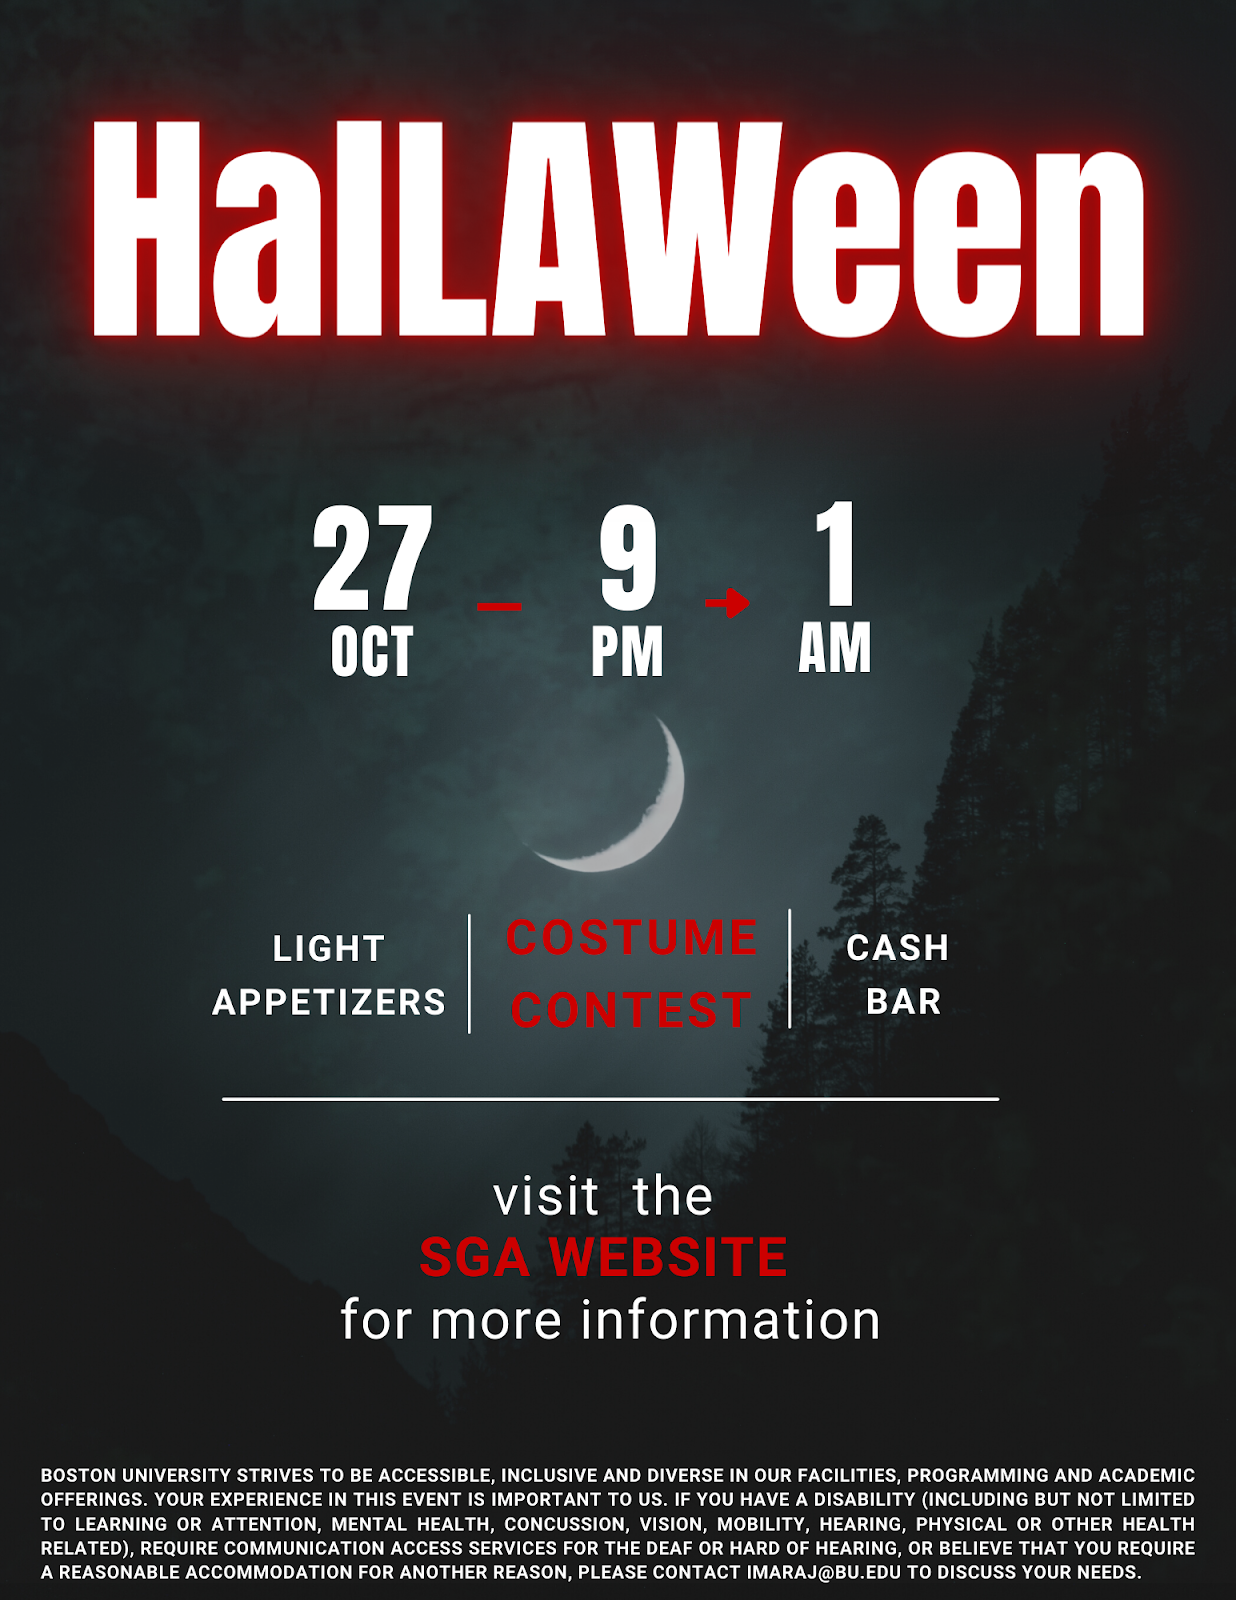 HalLAWeen flyer: October 27 from 9pm to 1am Light Appetizers. Costume Contest. Cash Bar. Visit SGA Website for more information. Accessibility statement, if you need accommodation for an y reason, please email imaraj@bu.edu